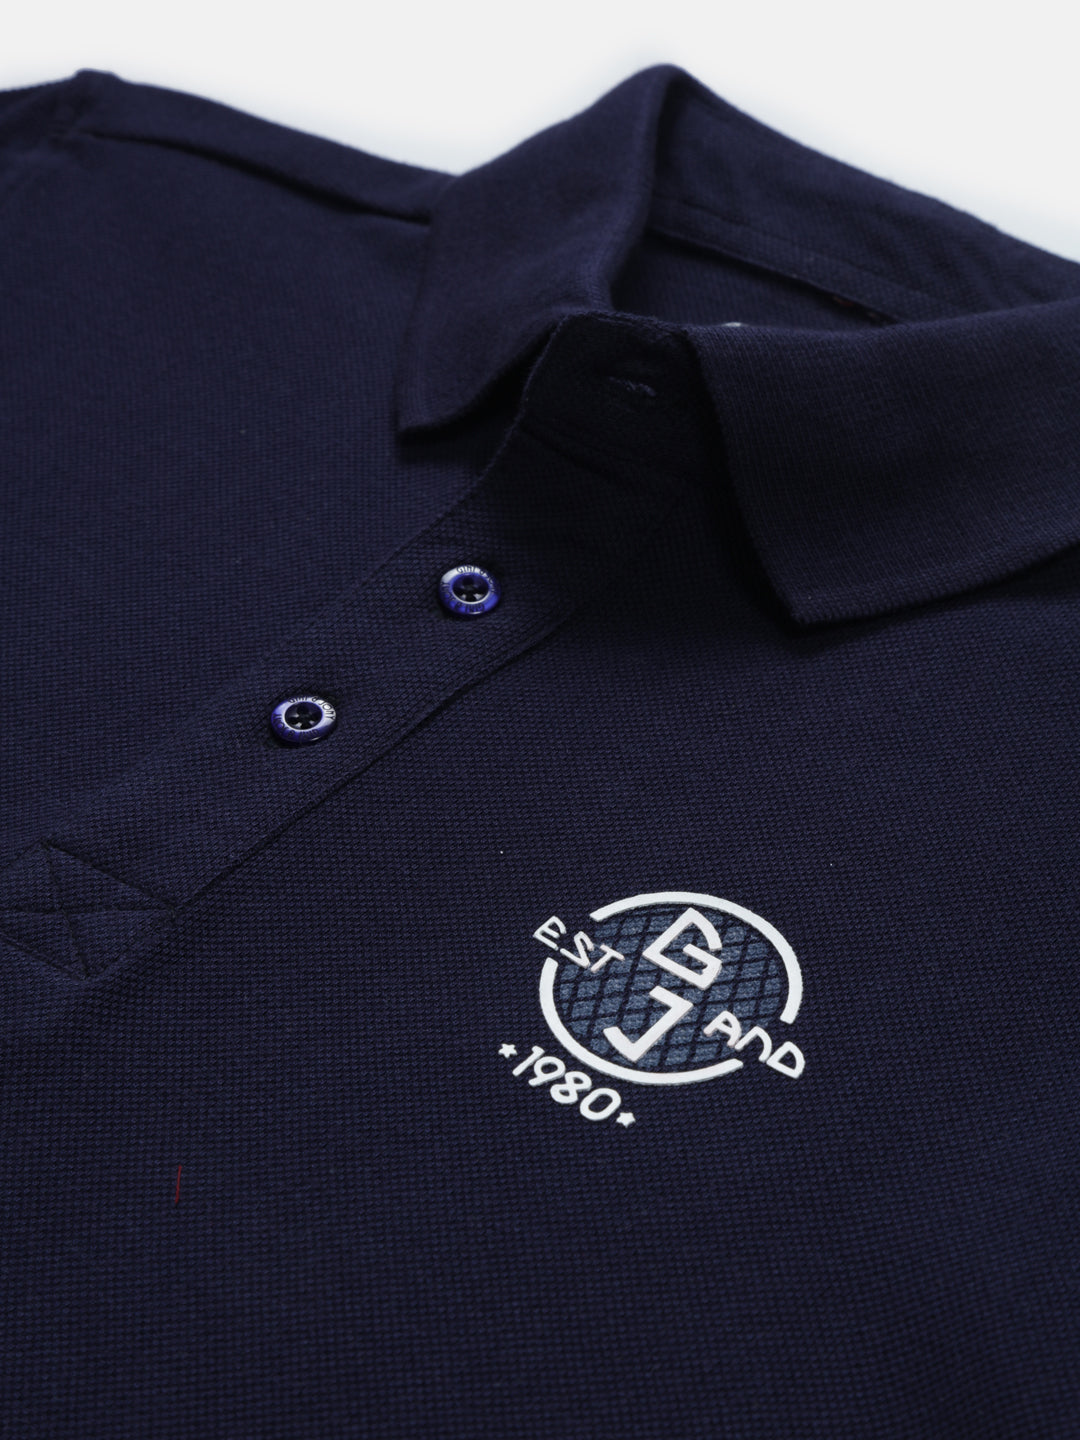 Boys Navy Blue Solid Knits Polo T-Shirt